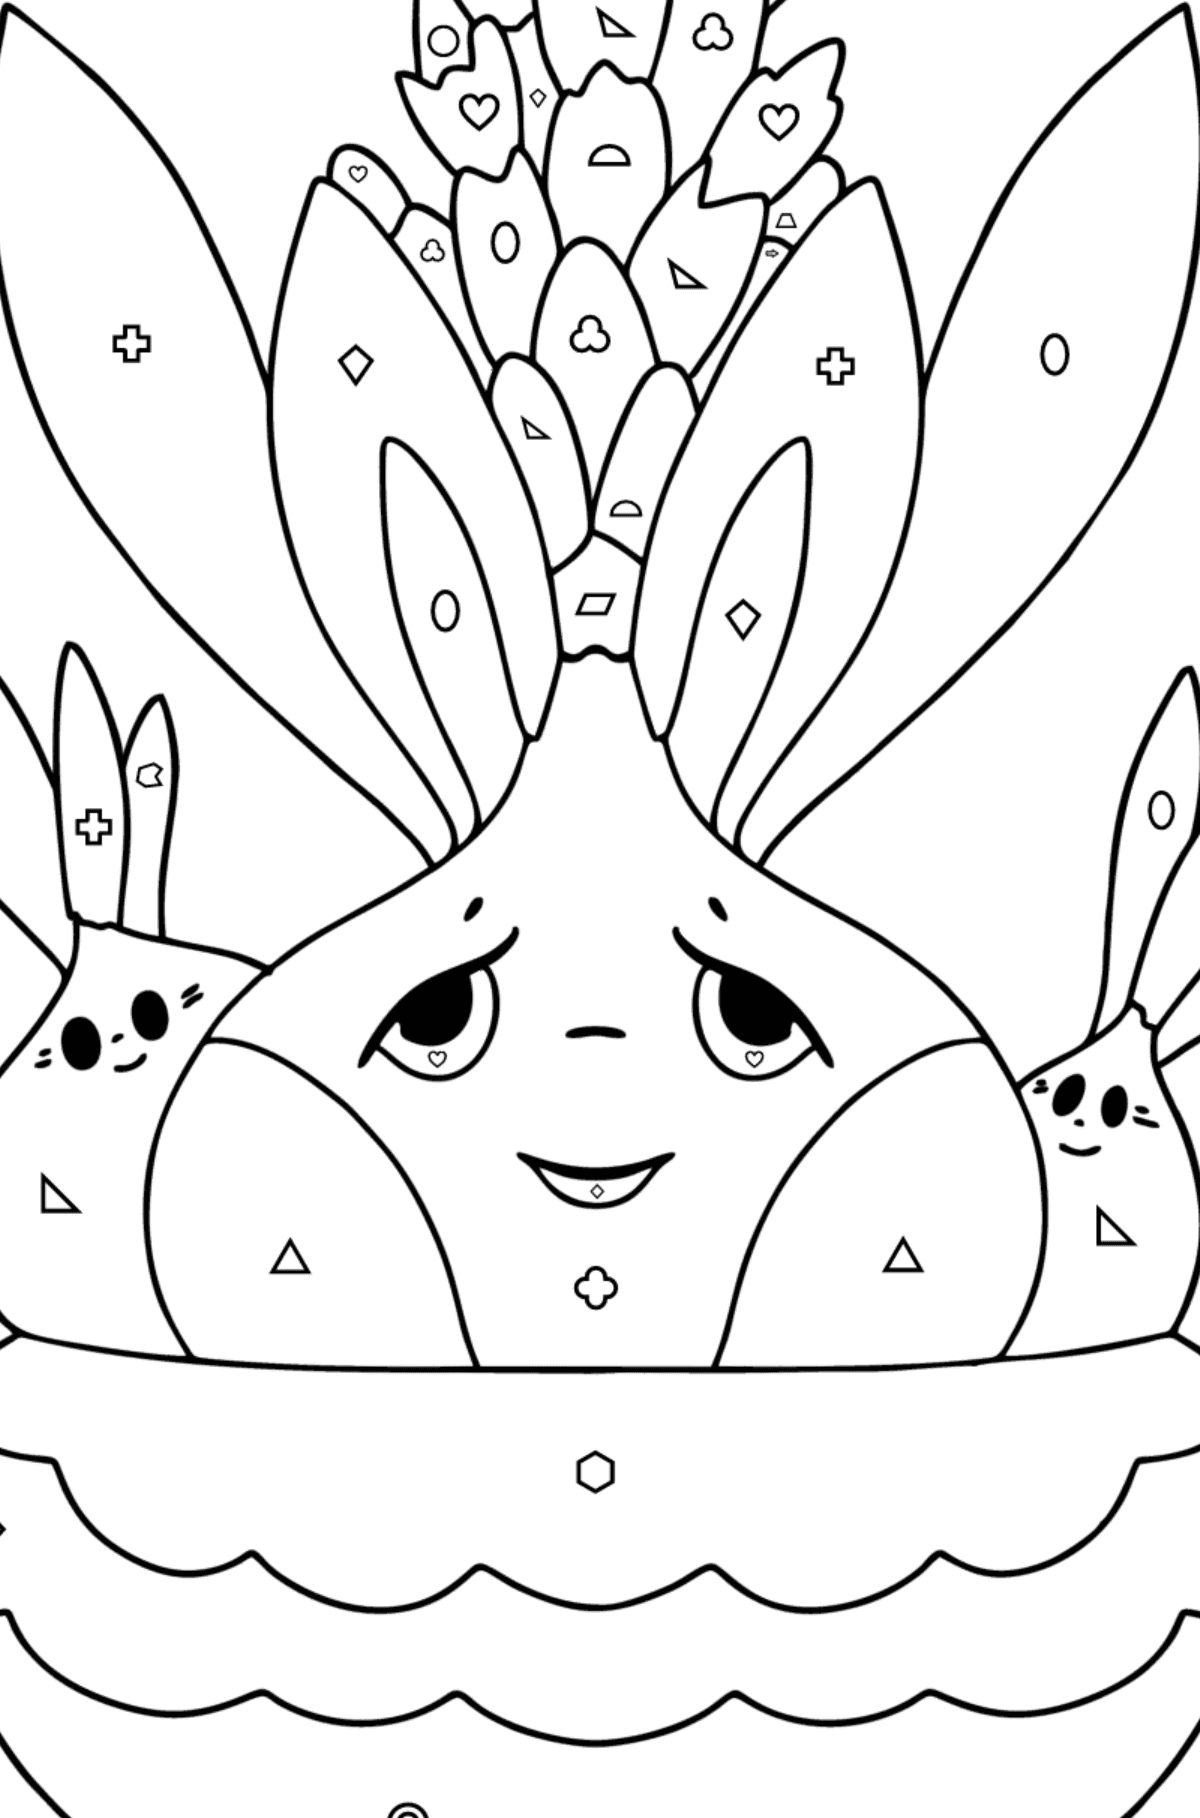 Hyacinth flowers with eyes coloring page - Coloring by Geometric Shapes for Kids